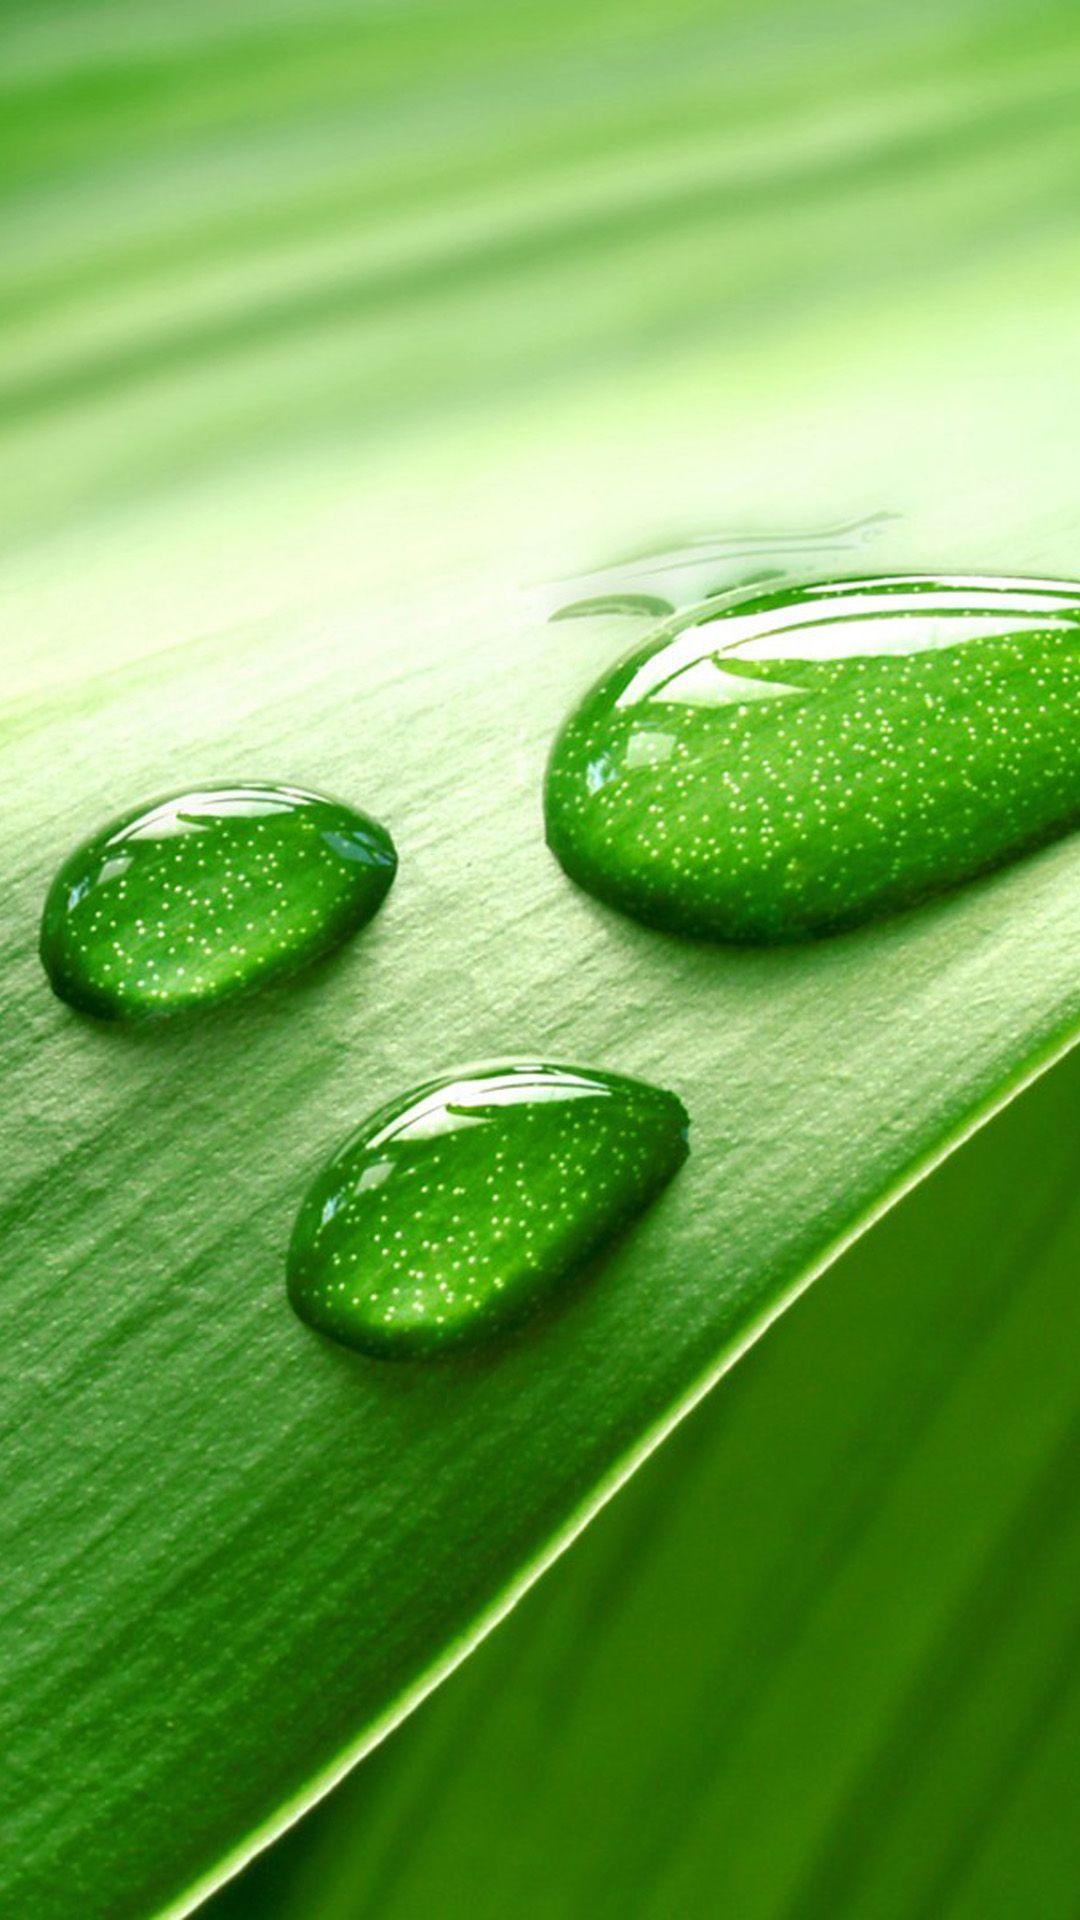 Green leaf and water drops HD iphone 6 plus wallpaper. iPhone 6